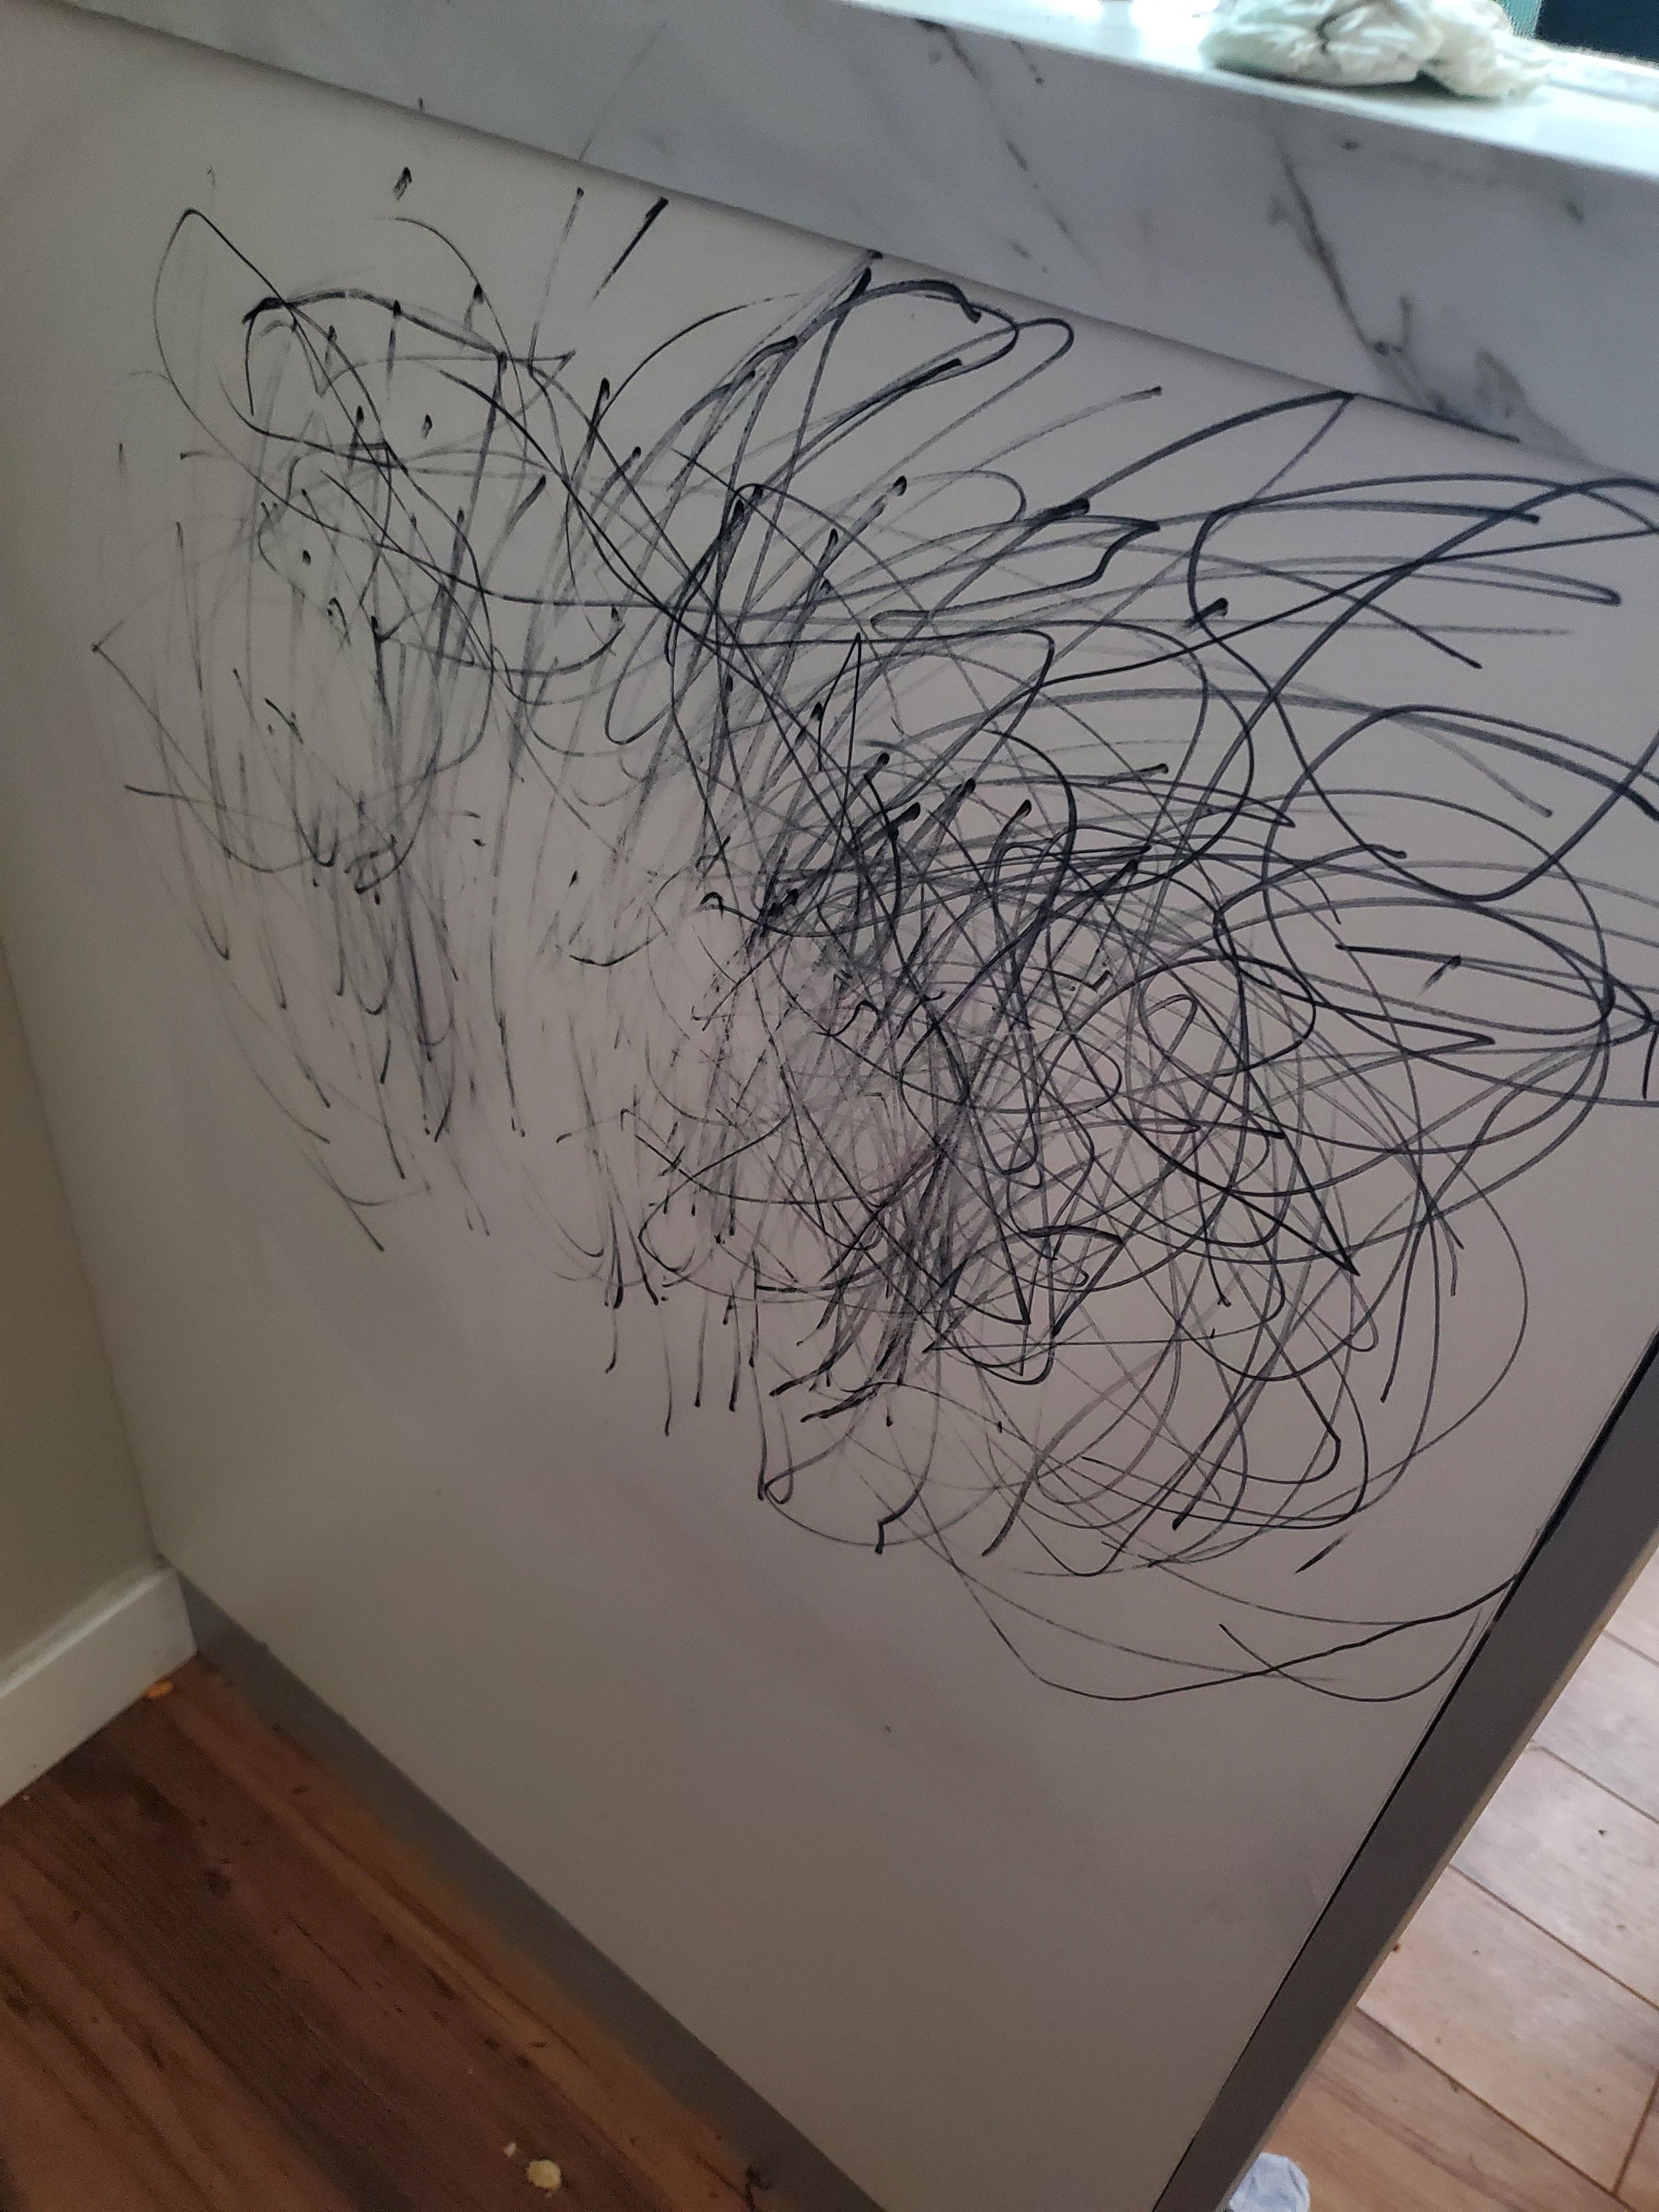 Scratches and scribbles cover a white surface, implying a child&#x27;s drawing or accidental marks